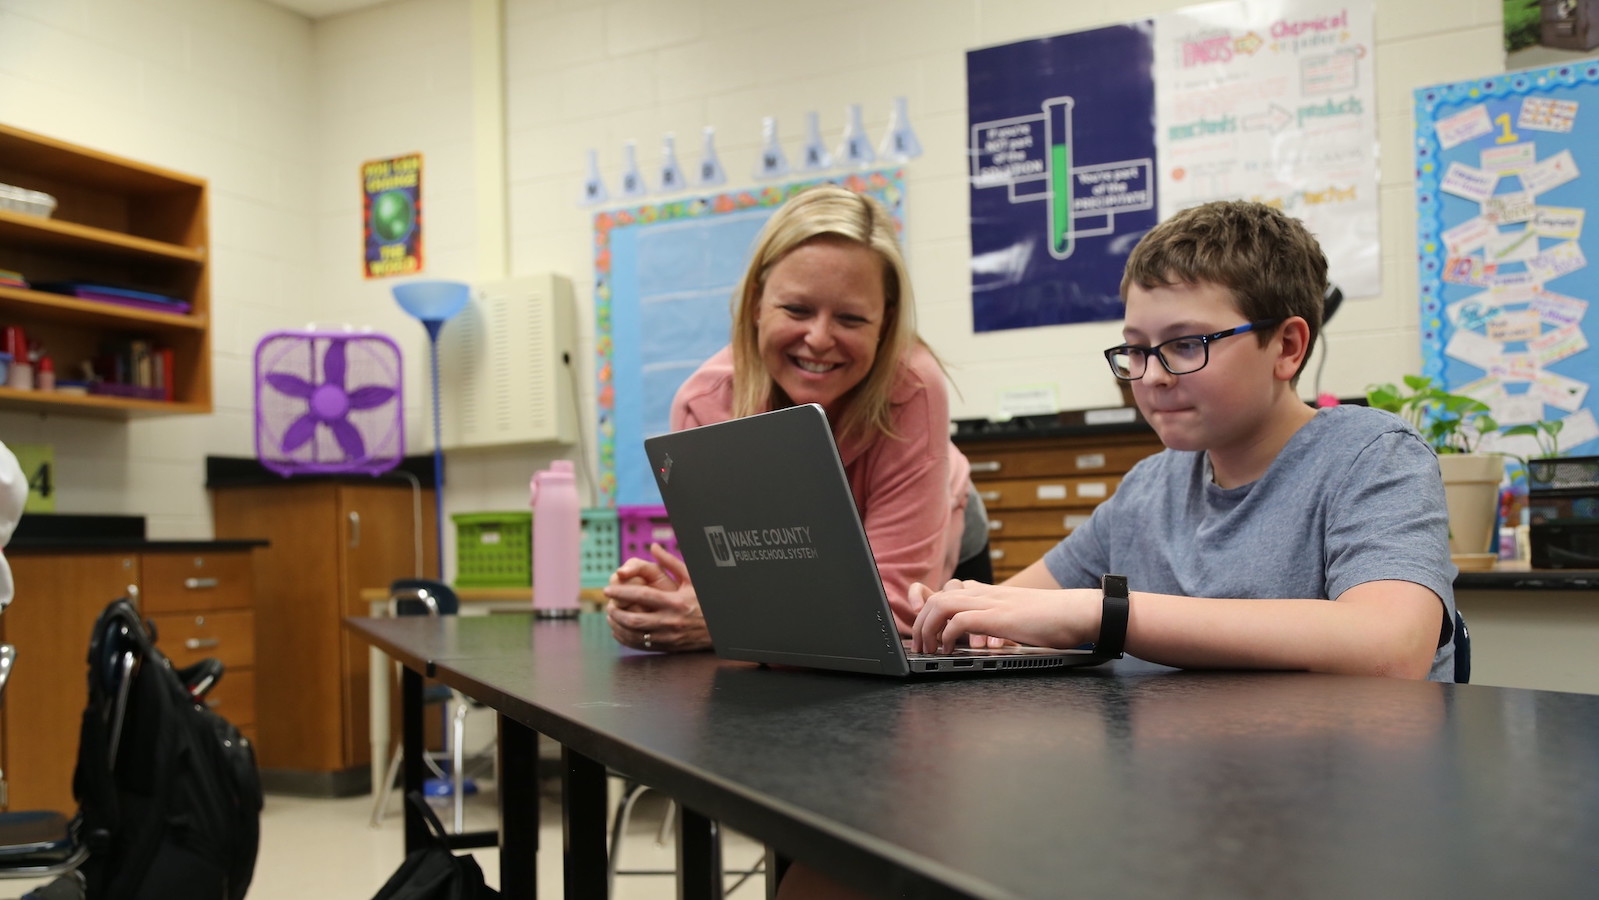 A teacher and student smile as they work on a laptop together in a classroom. The student is sitting at a desk while a teacher leans on the desk.